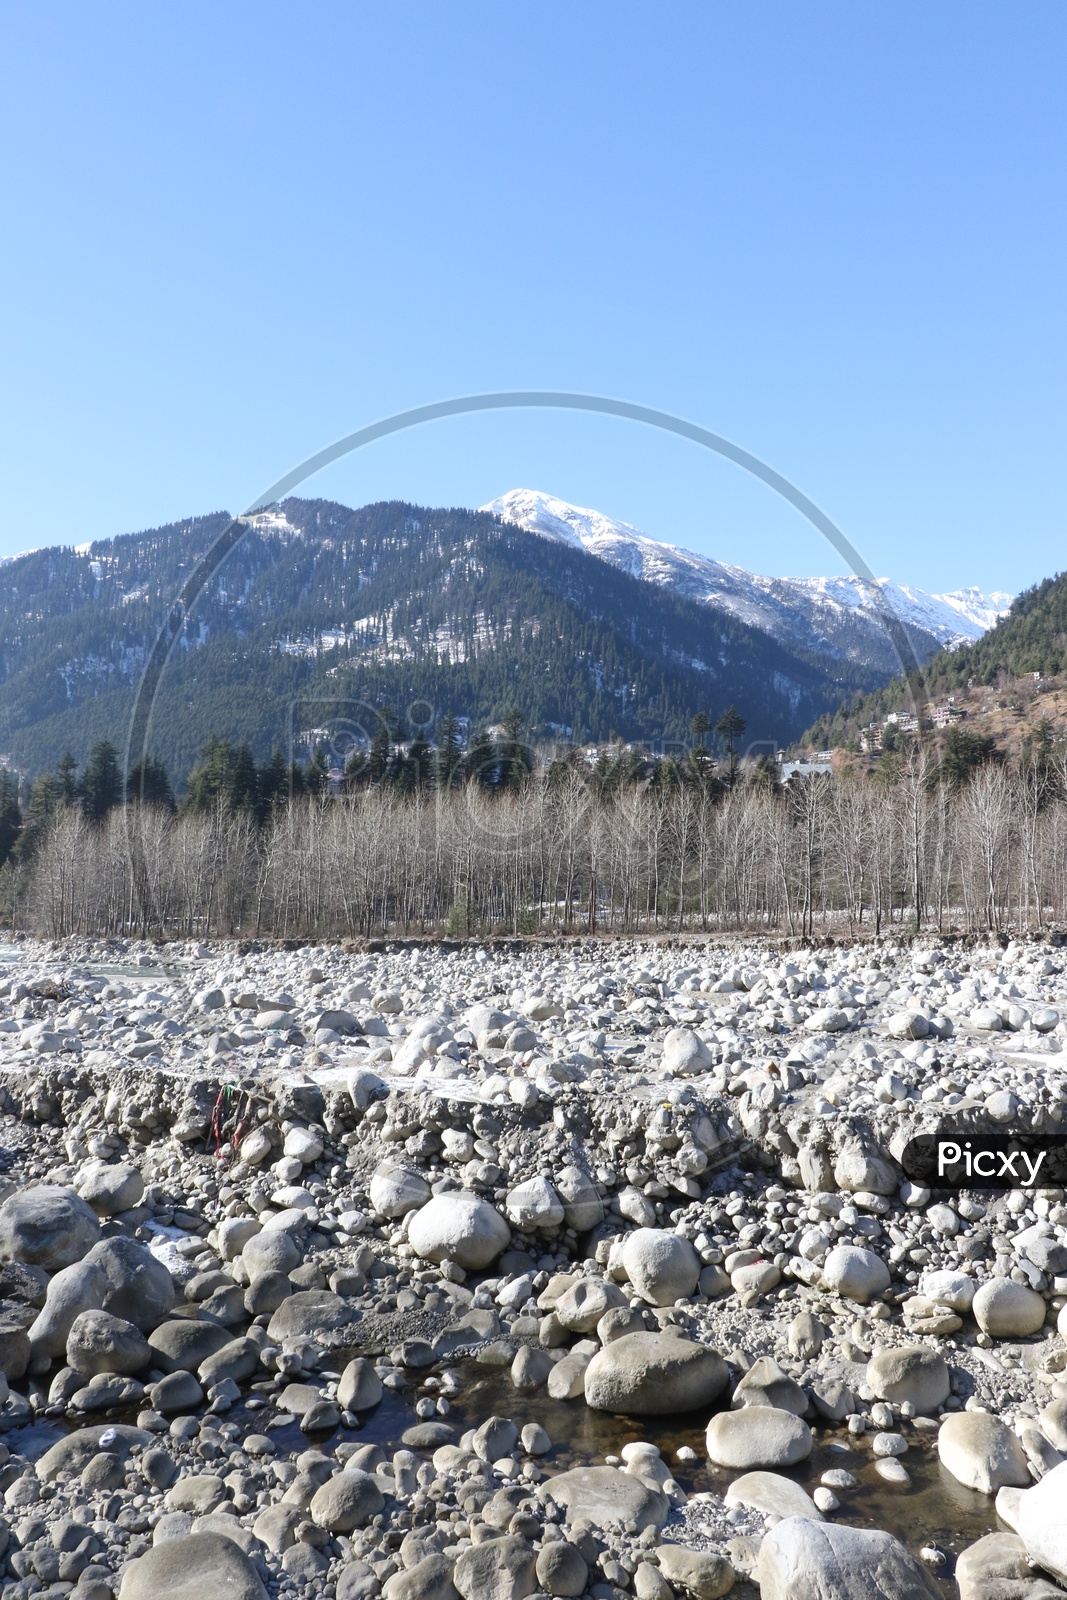 Landscapes of Manali - Snow capped Mountains & Stones